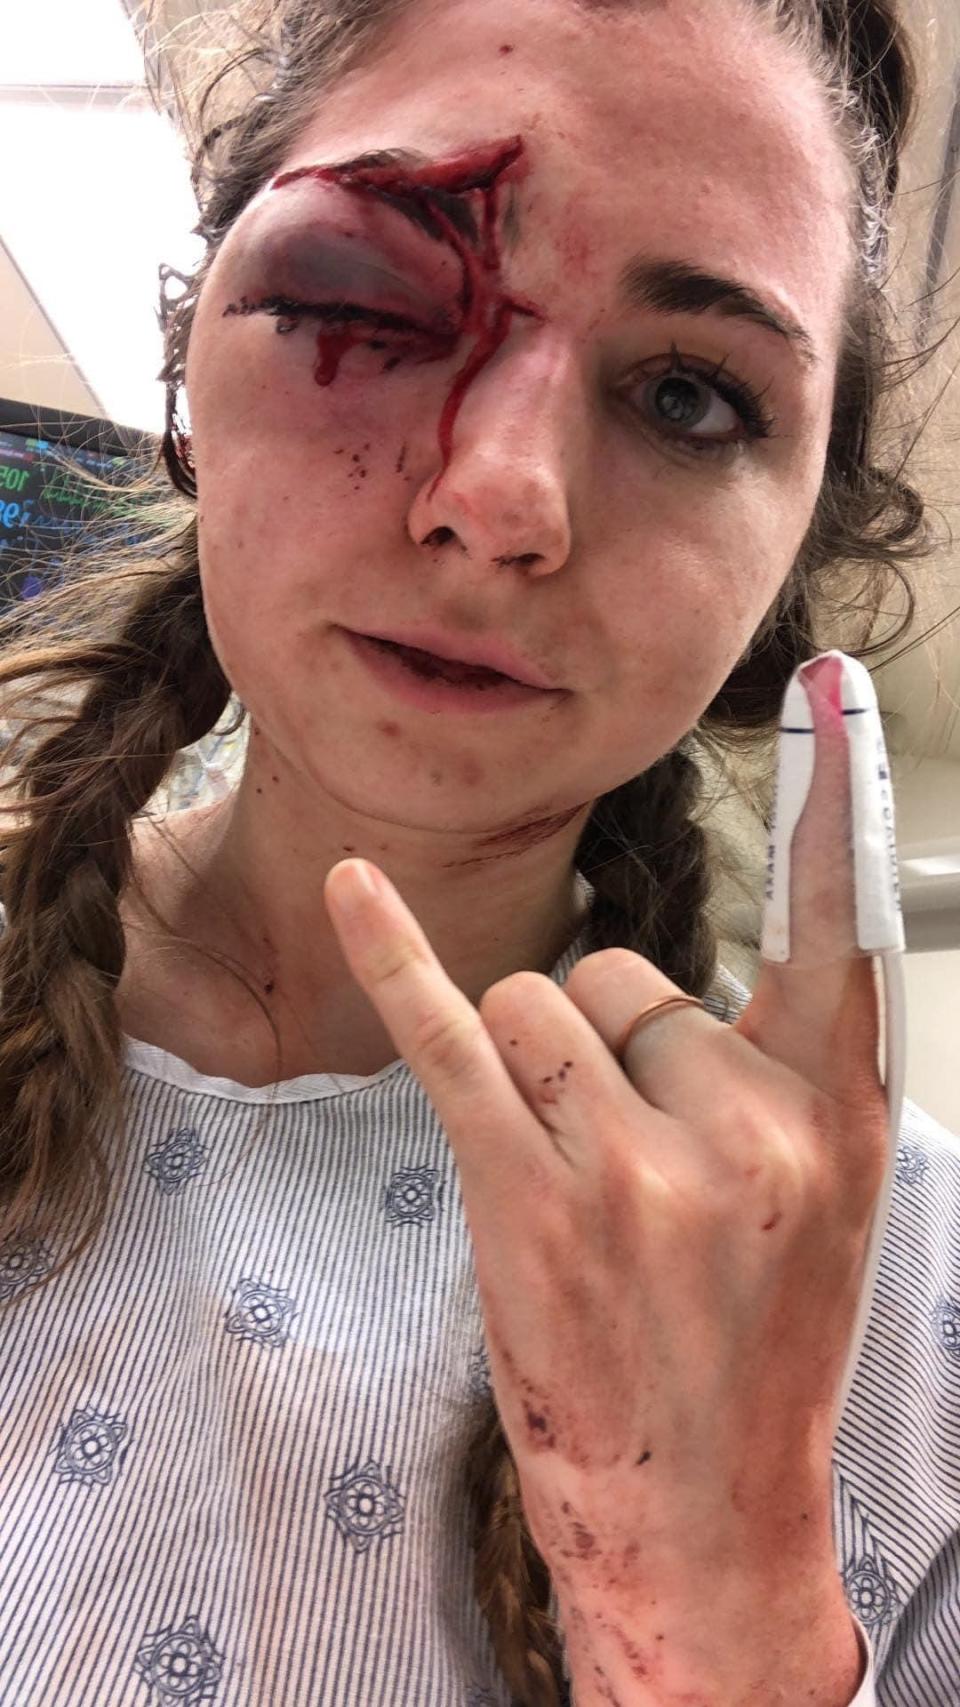 Megan Matthews, 22, in the hospital after she was hit in the eye with a sponge-tipped projectile fired by police at a May 29 protest in Denver.